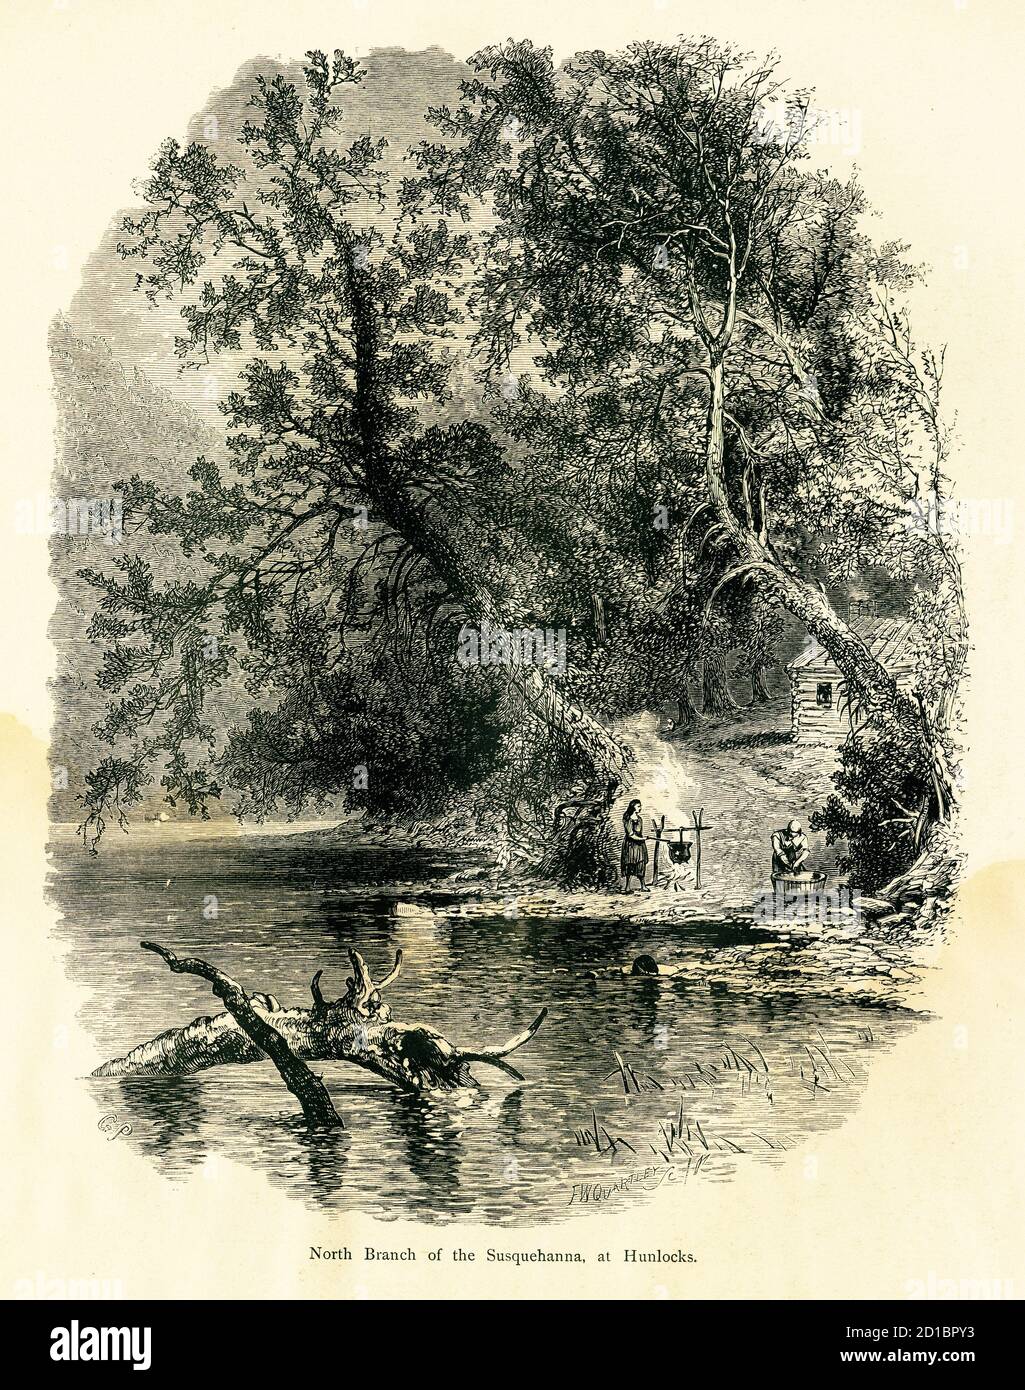 Antique illustration of the north branch of the Susquehanna River. Engraving published in Picturesque America or the Land We Live In (D. Appleton & Co Stock Photo